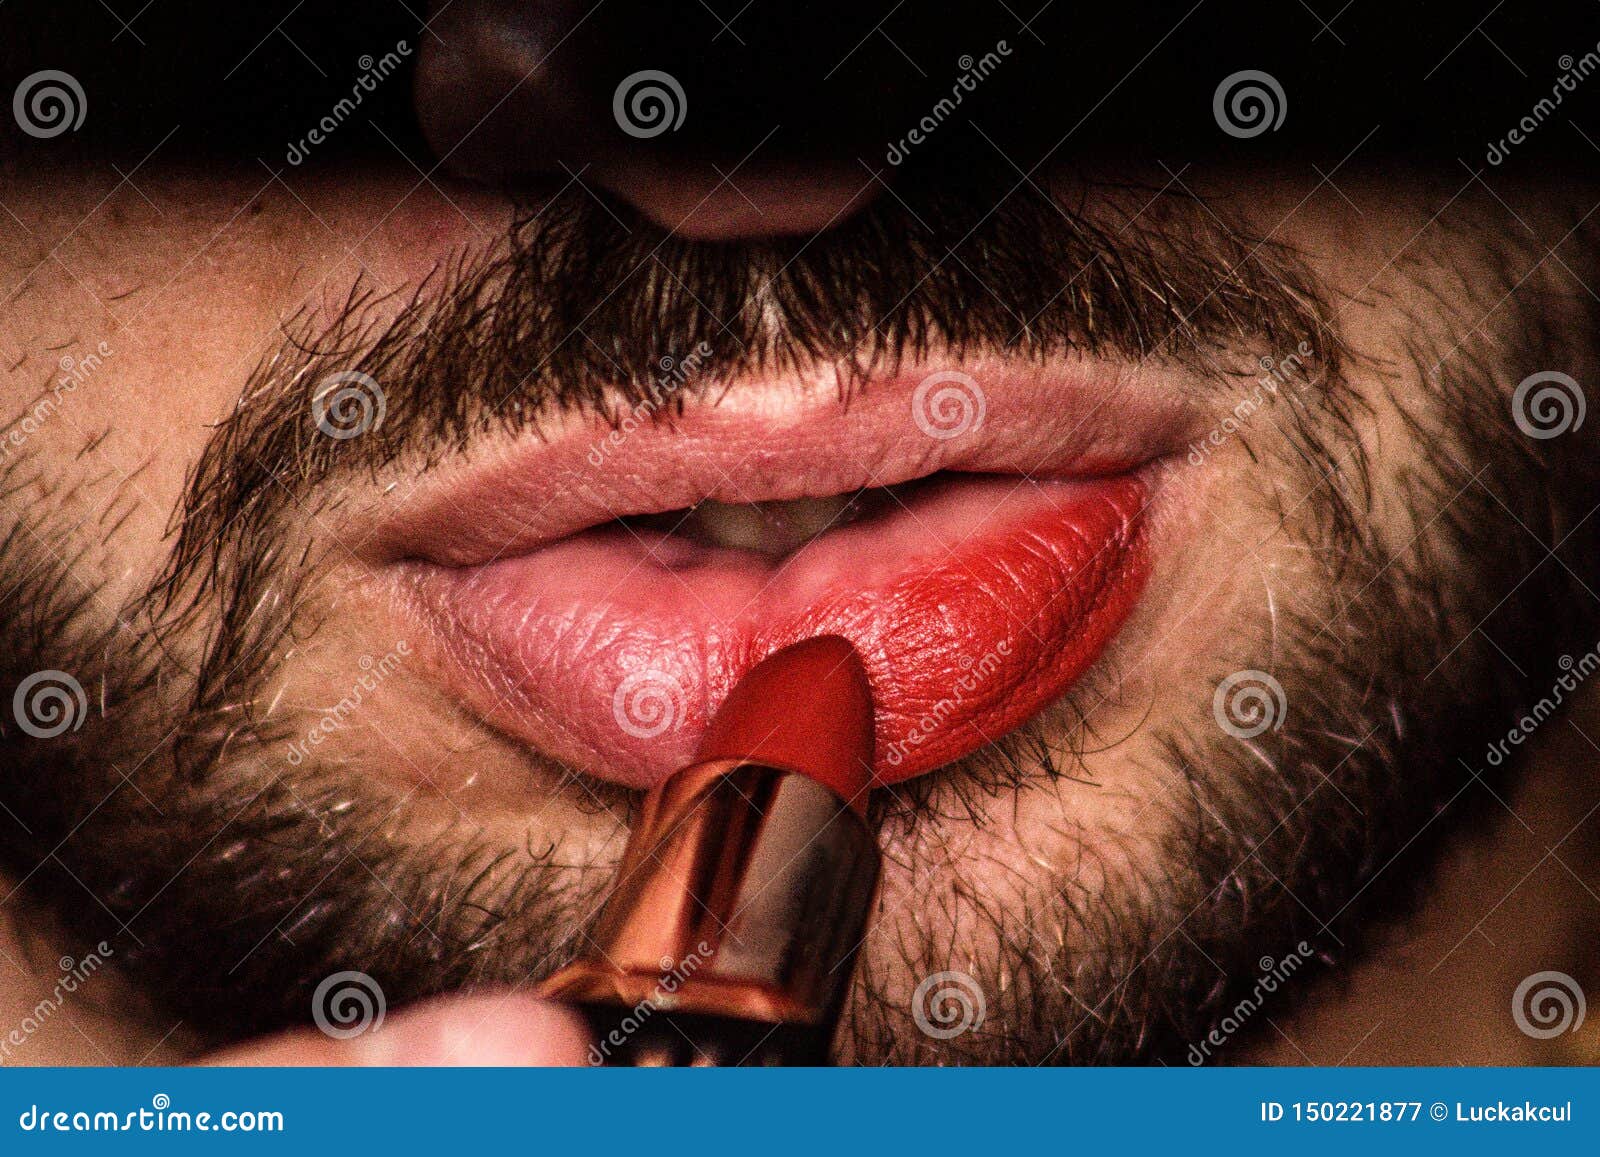 The Man With Pretty Lips A Young Man Depicts His Lips with Red Lipstick. Stock Image - Image of